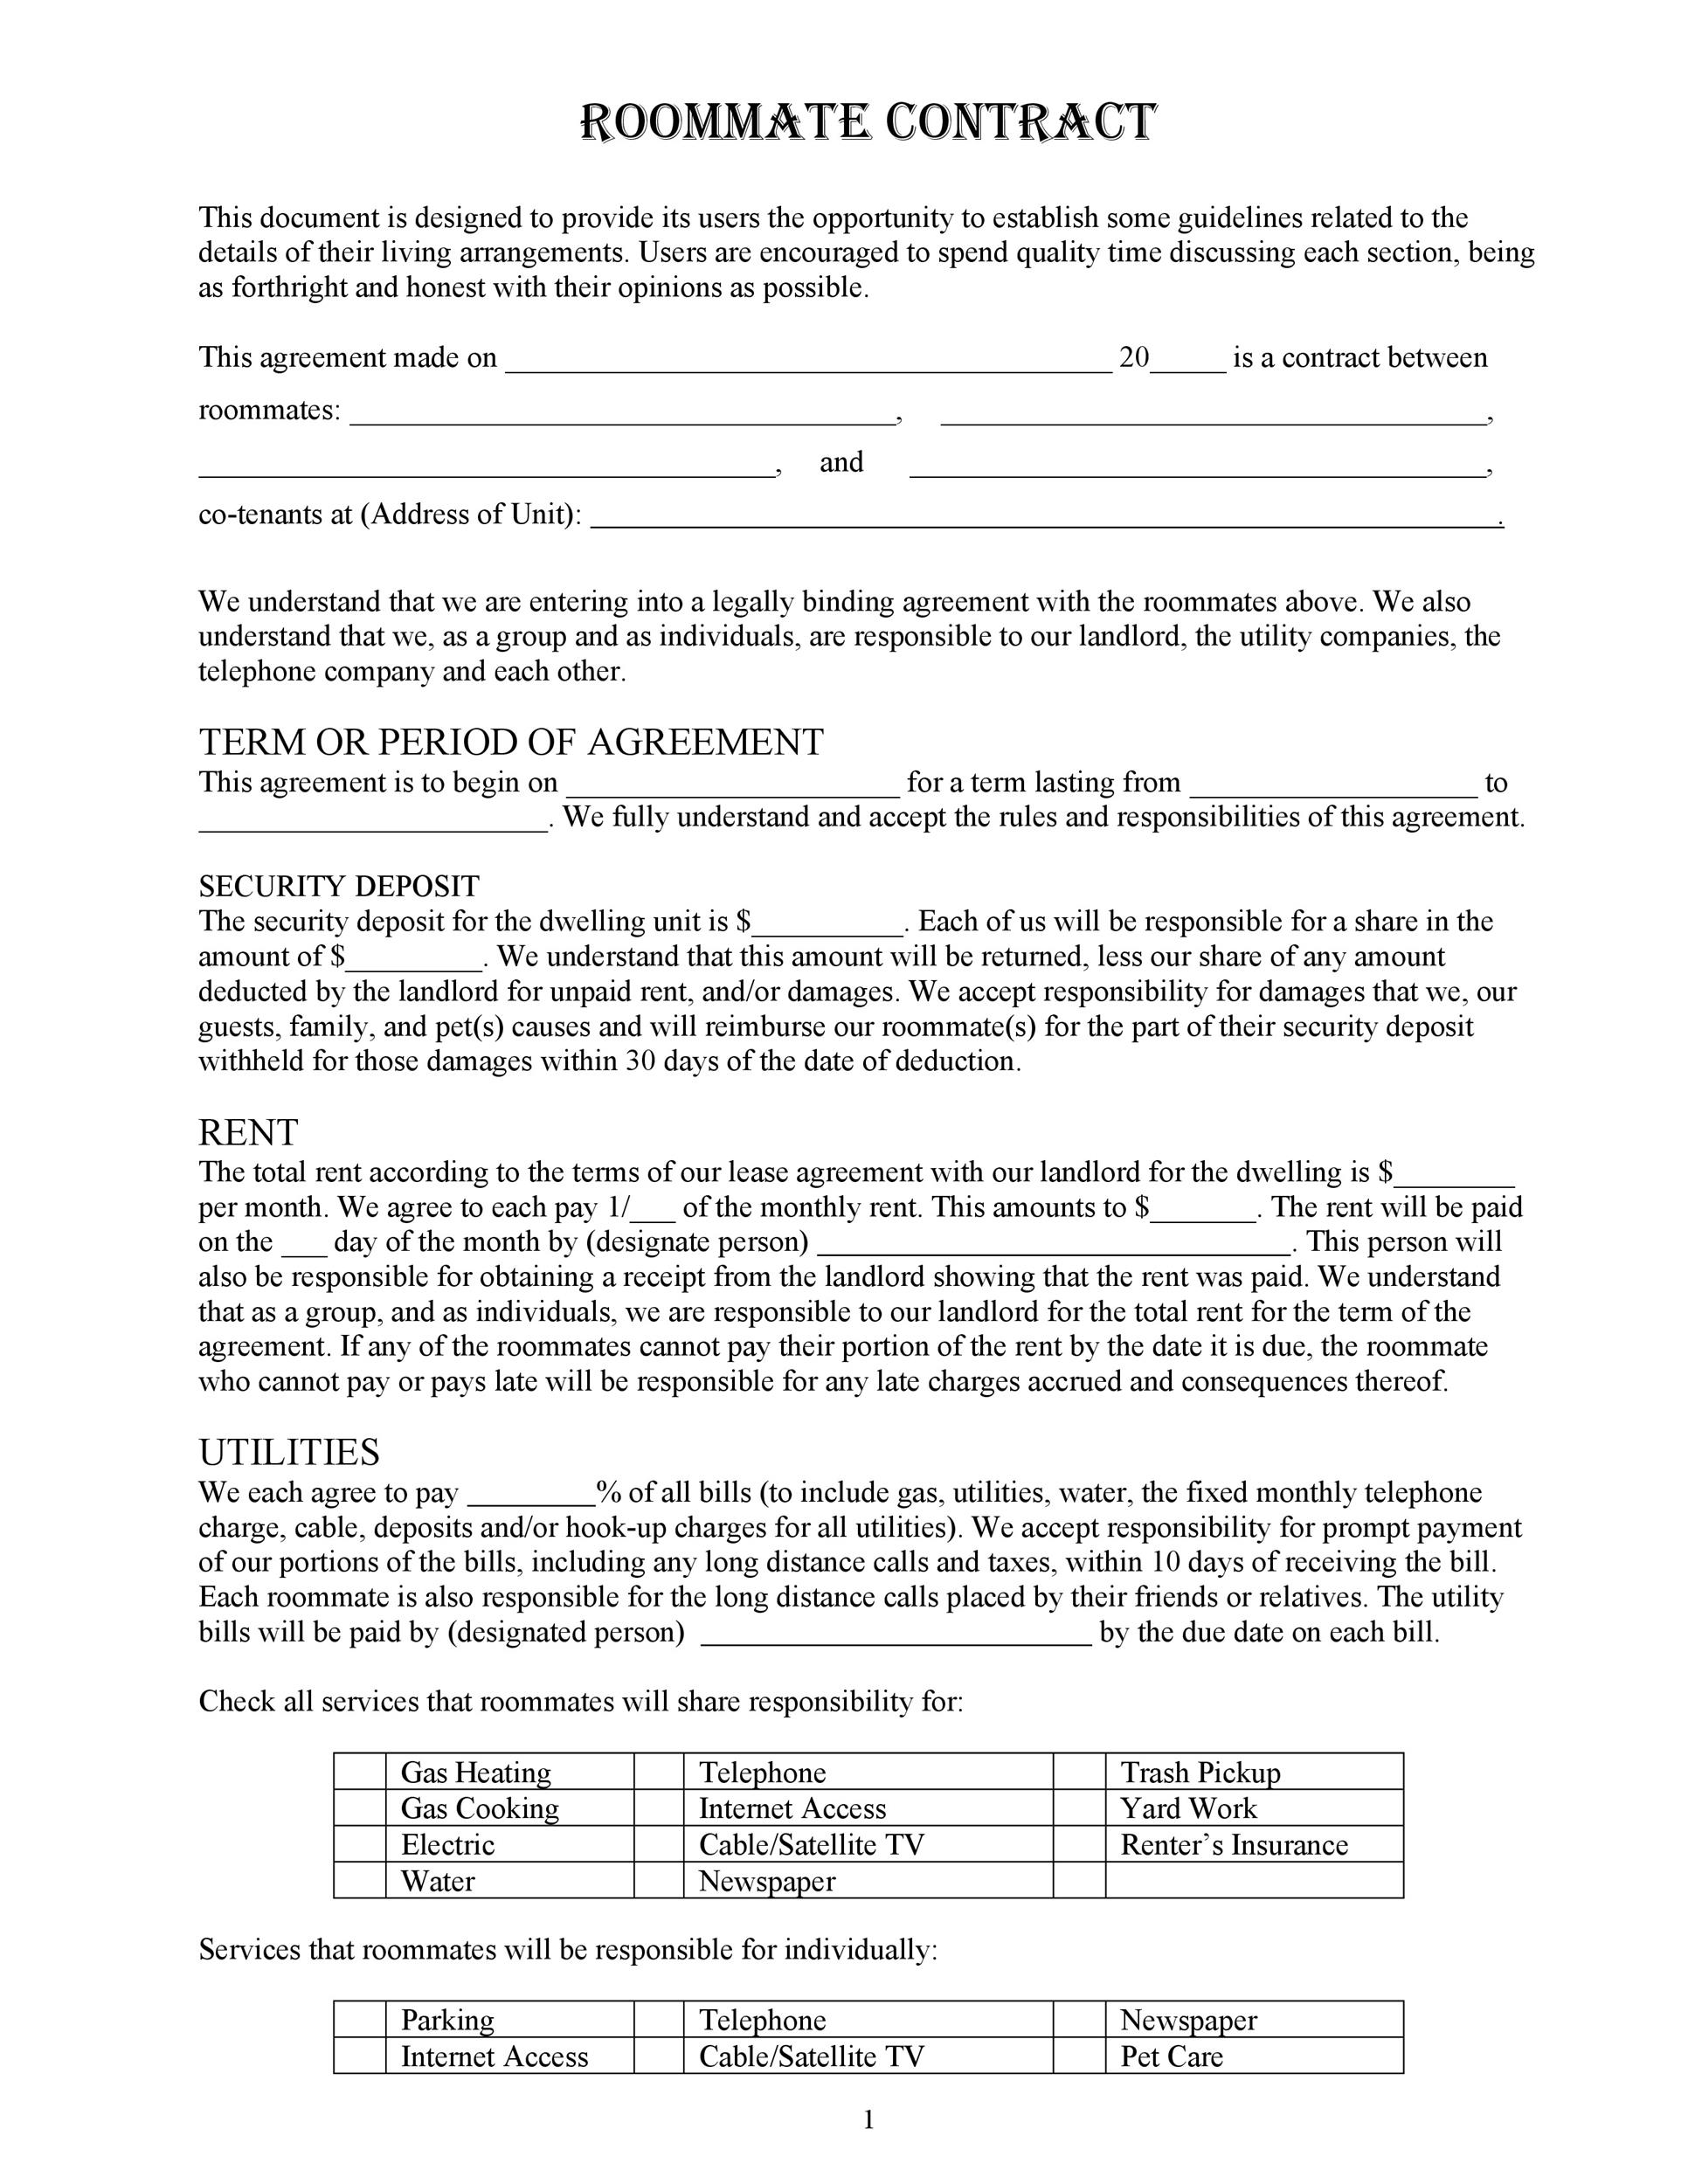 roommate agreement template 34